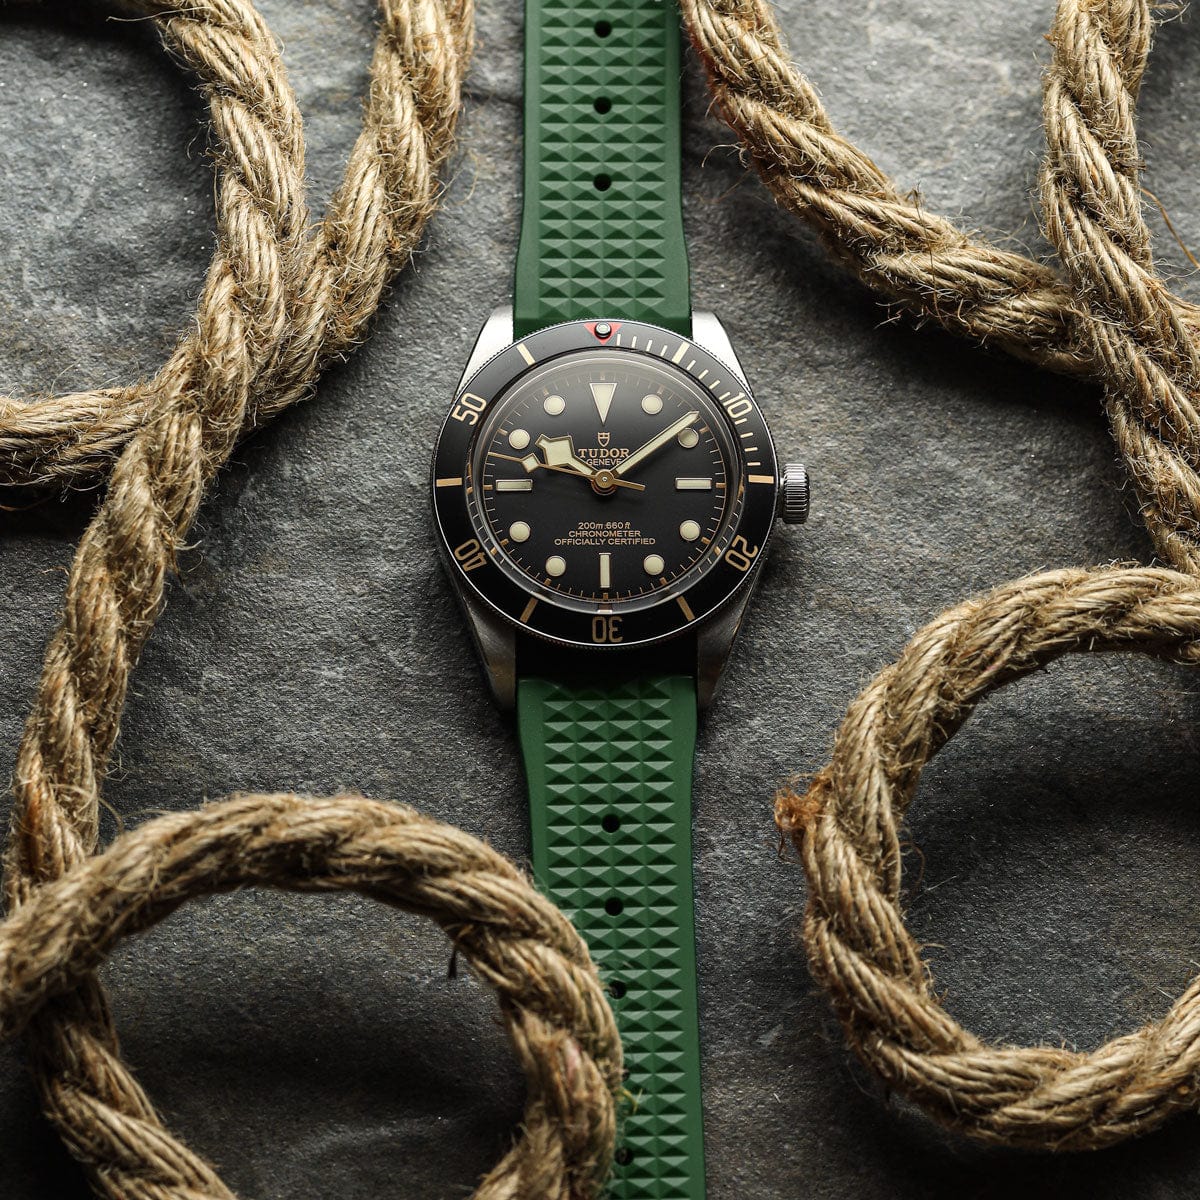 ZULUDIVER Seacroft Waffle FKM Rubber Dive Watch Strap (MkII) - Green - Brushed Buckle